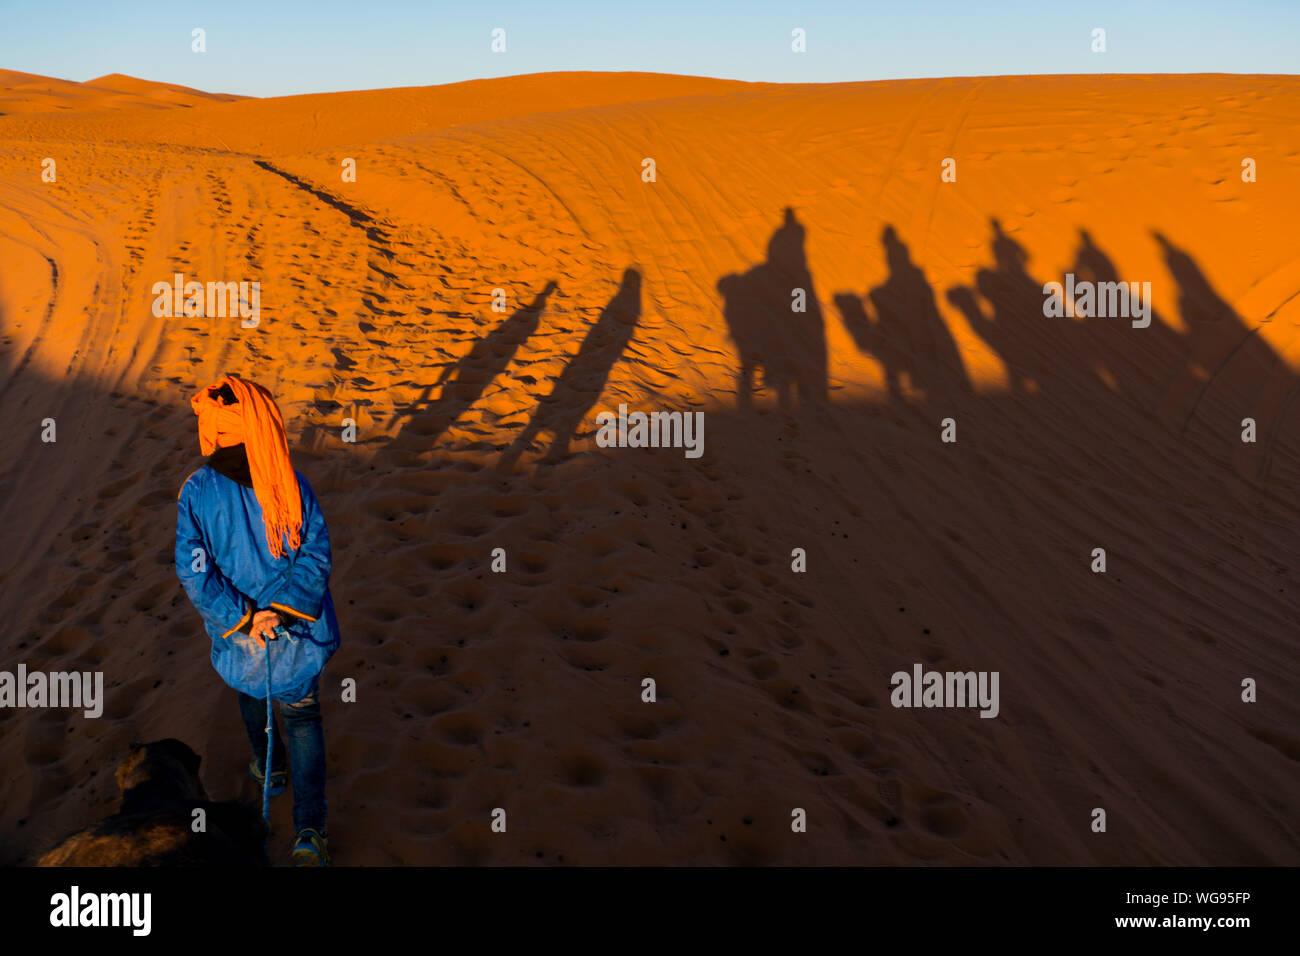 Camels caravan shadows projected over Erg Chebbi desert sand dunes at Morocco Stock Photo